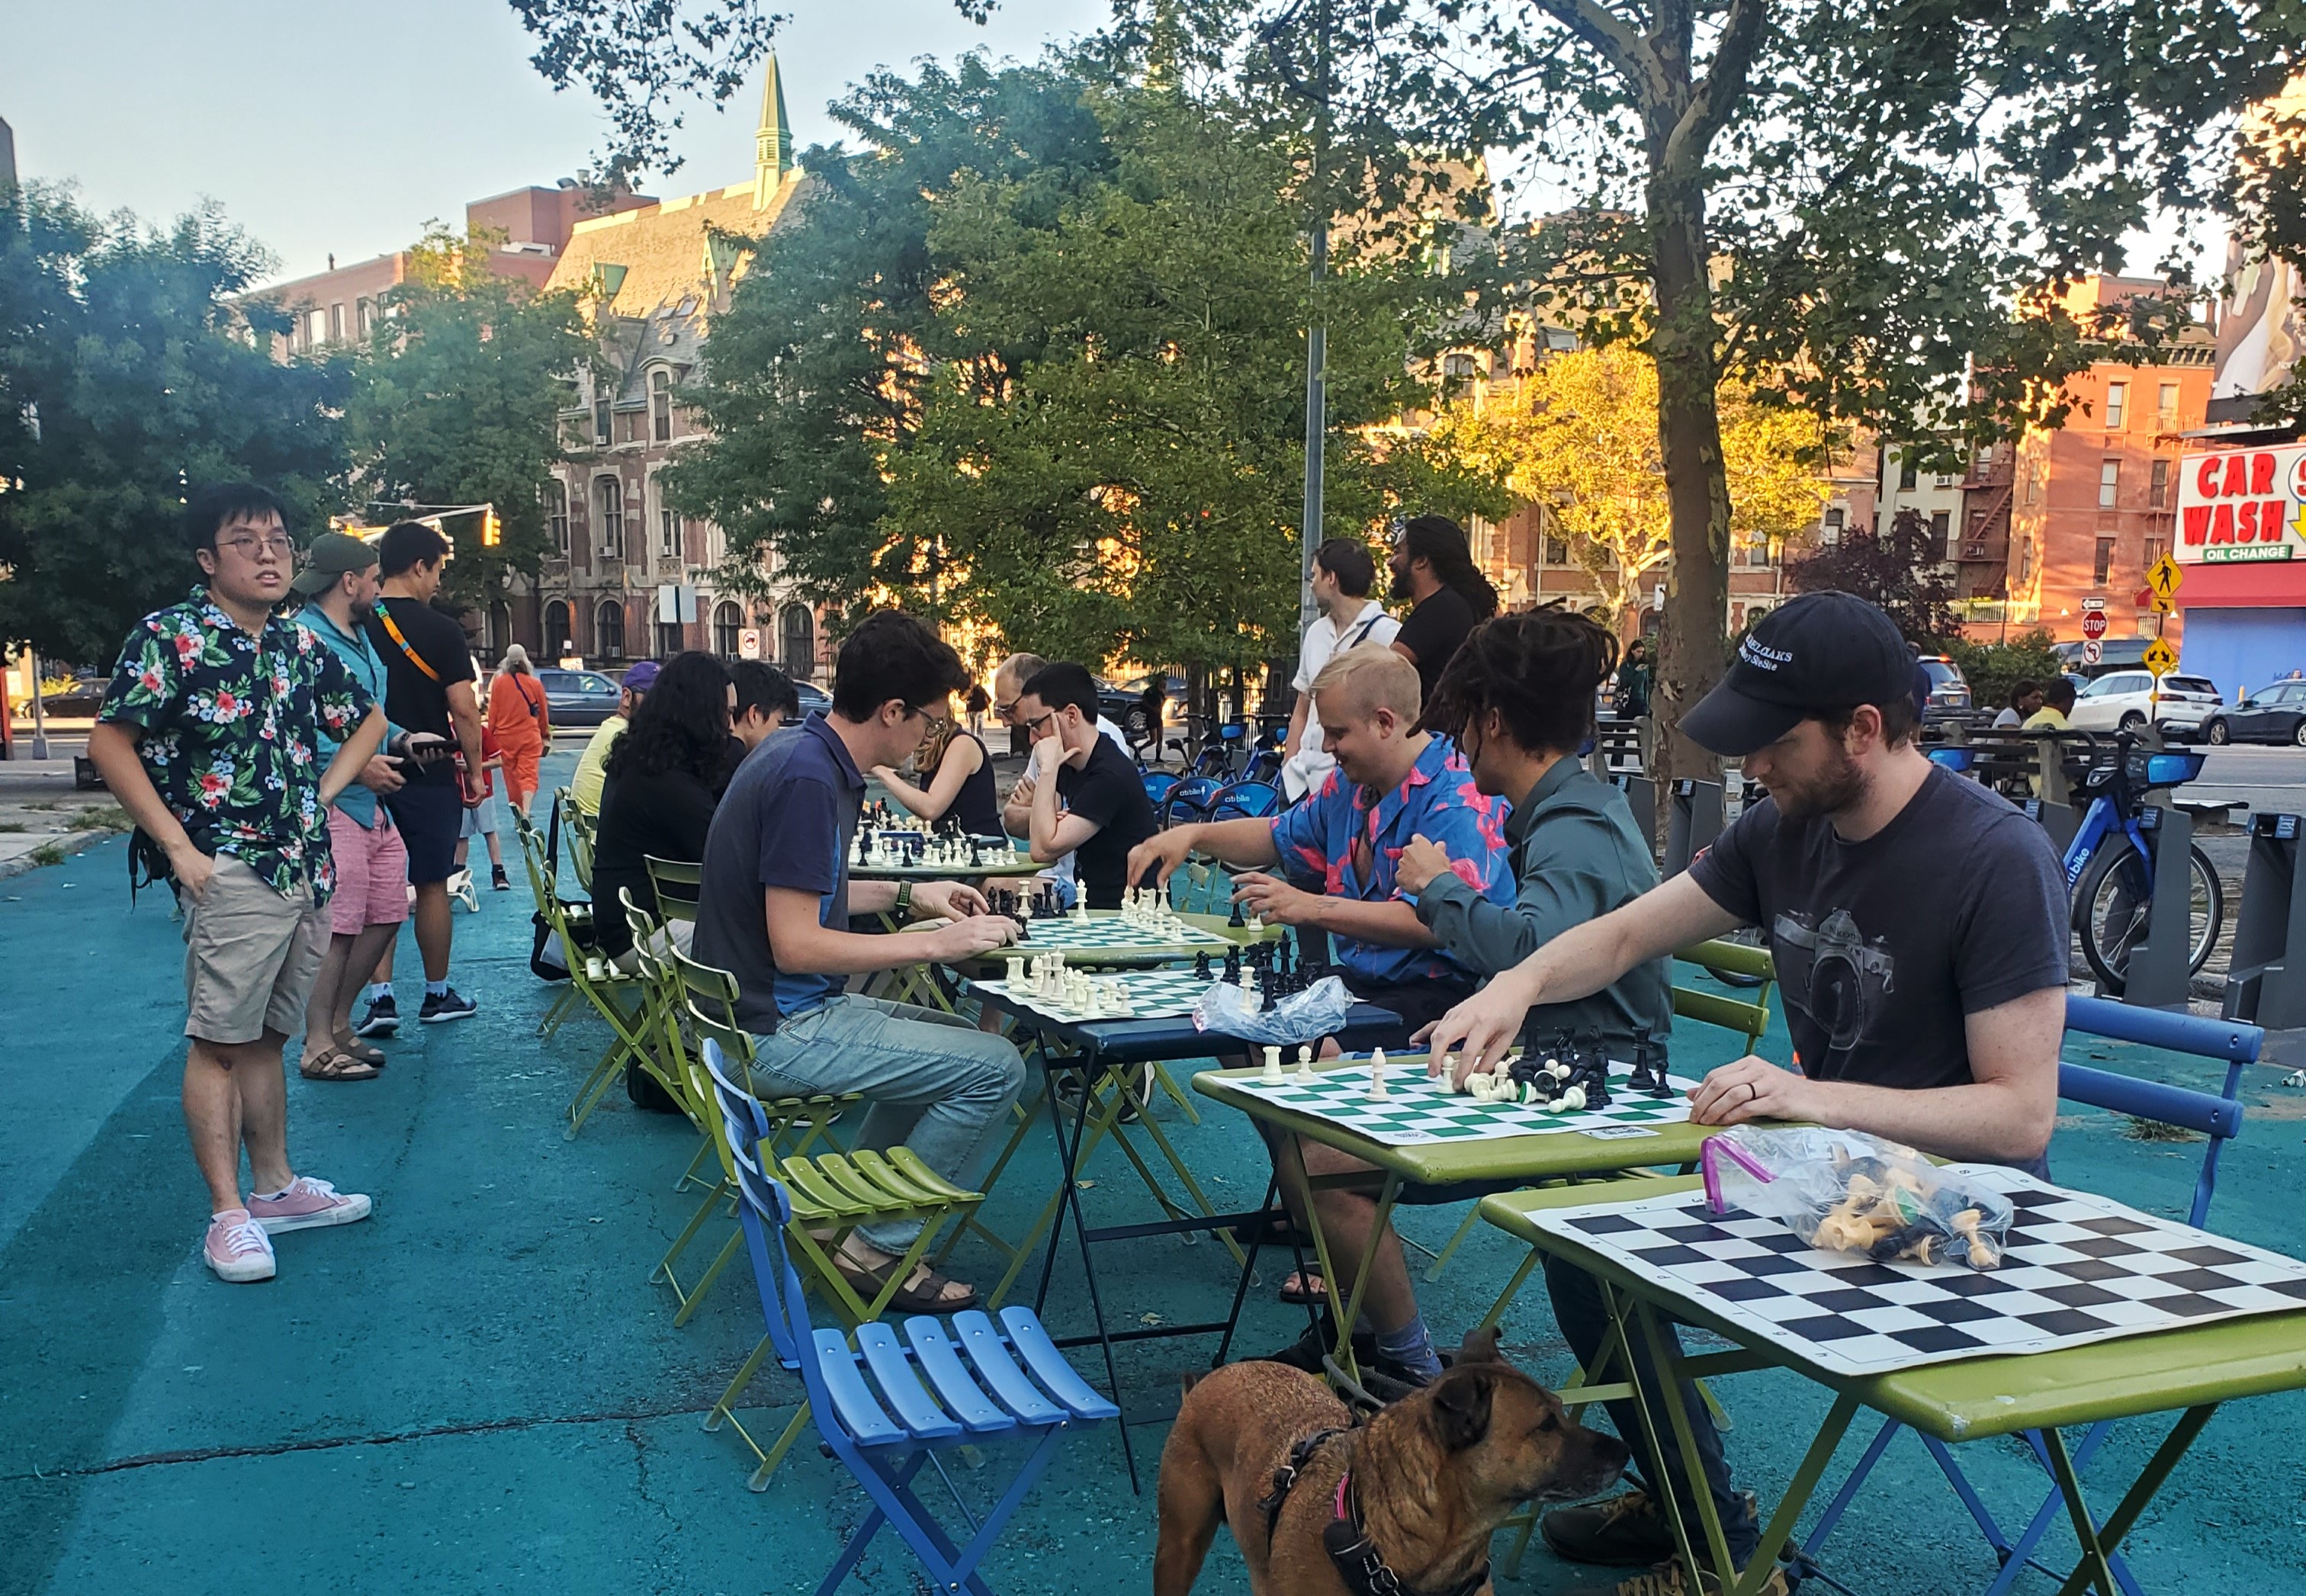 Play Chess with Prospect Park Chess Club on Underhill Plaza